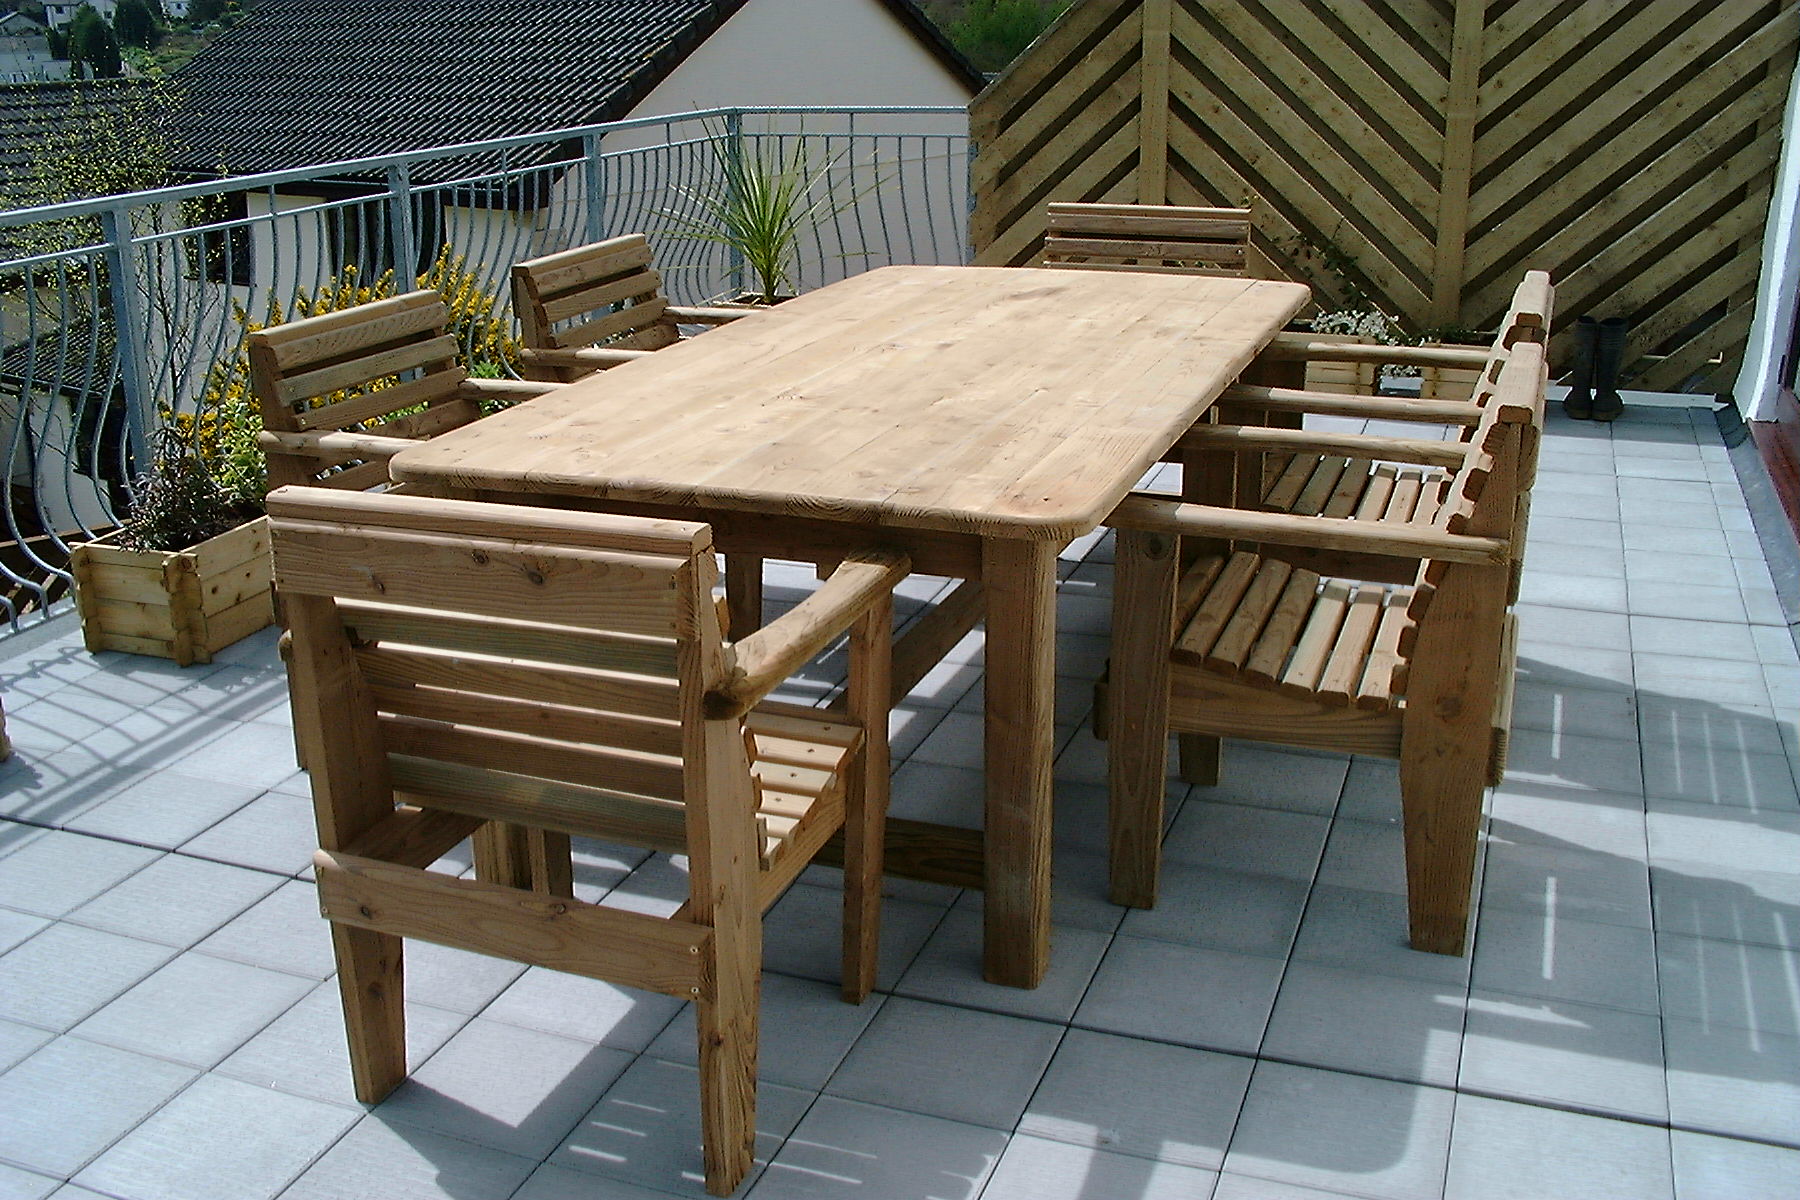 8'X4' TABLE + CHAIRS 04